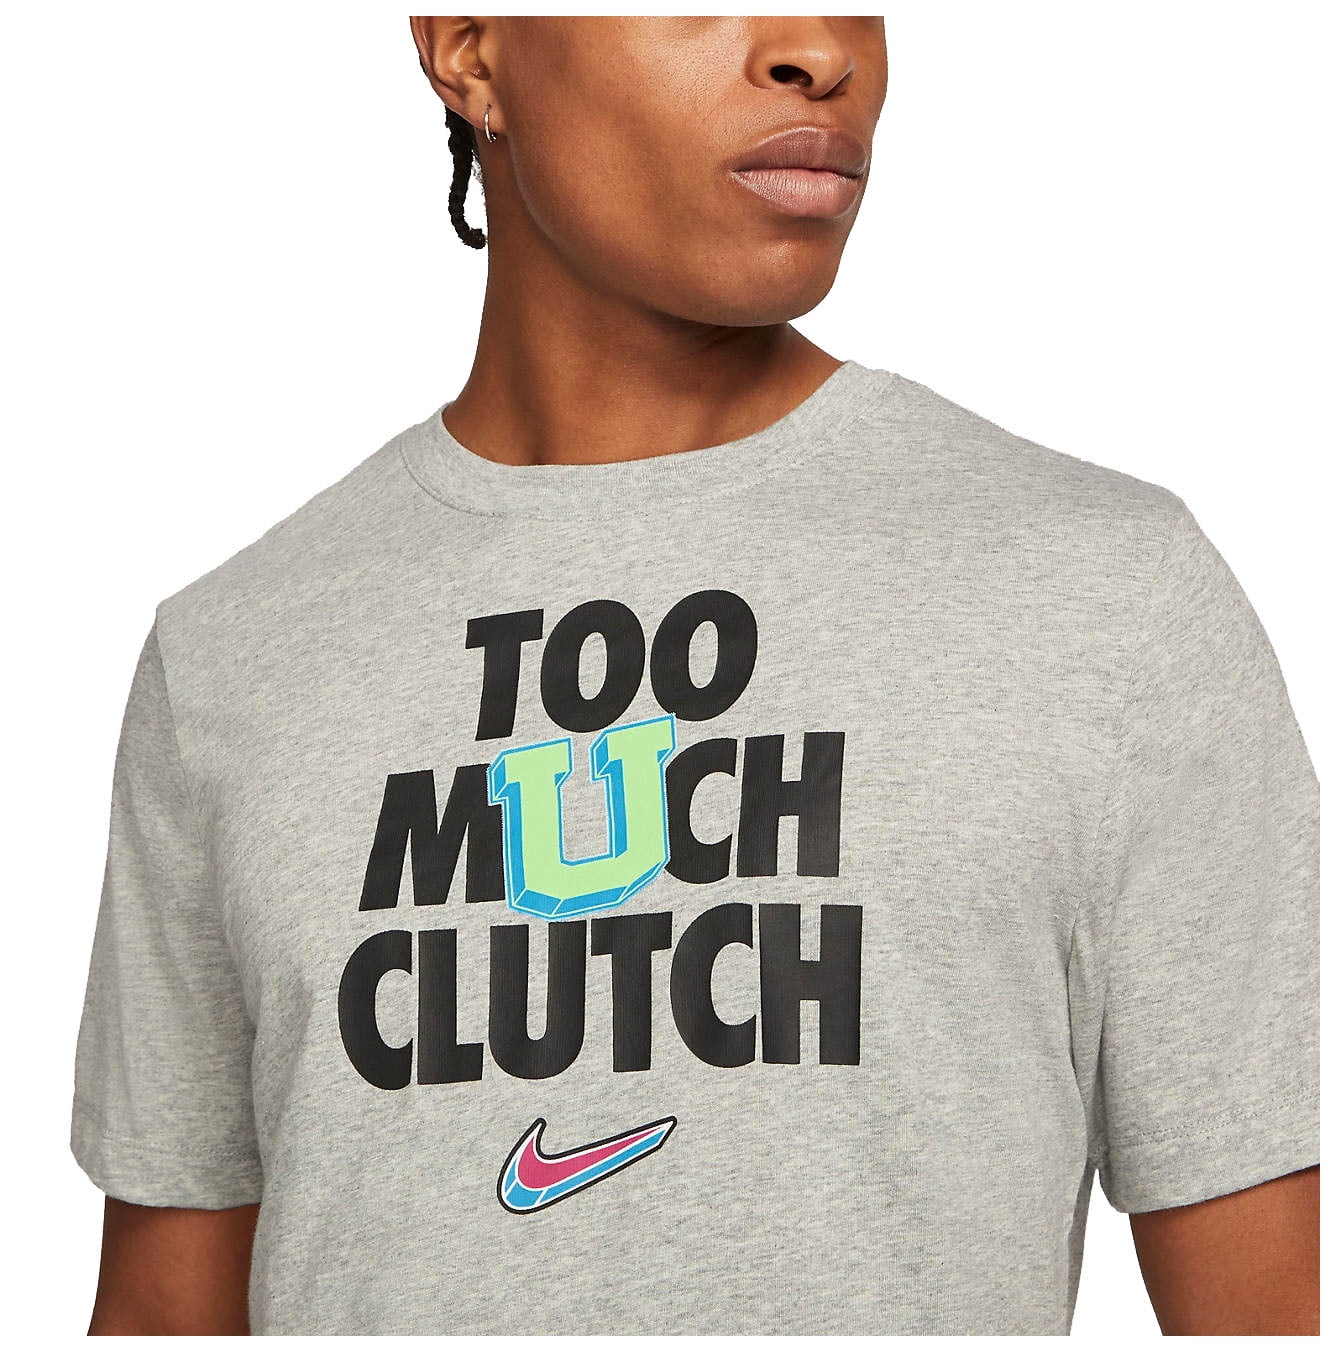 Nike Men's Verbiage Too Much Clutch Graphic Tee (Heather Grey, X-Large) 